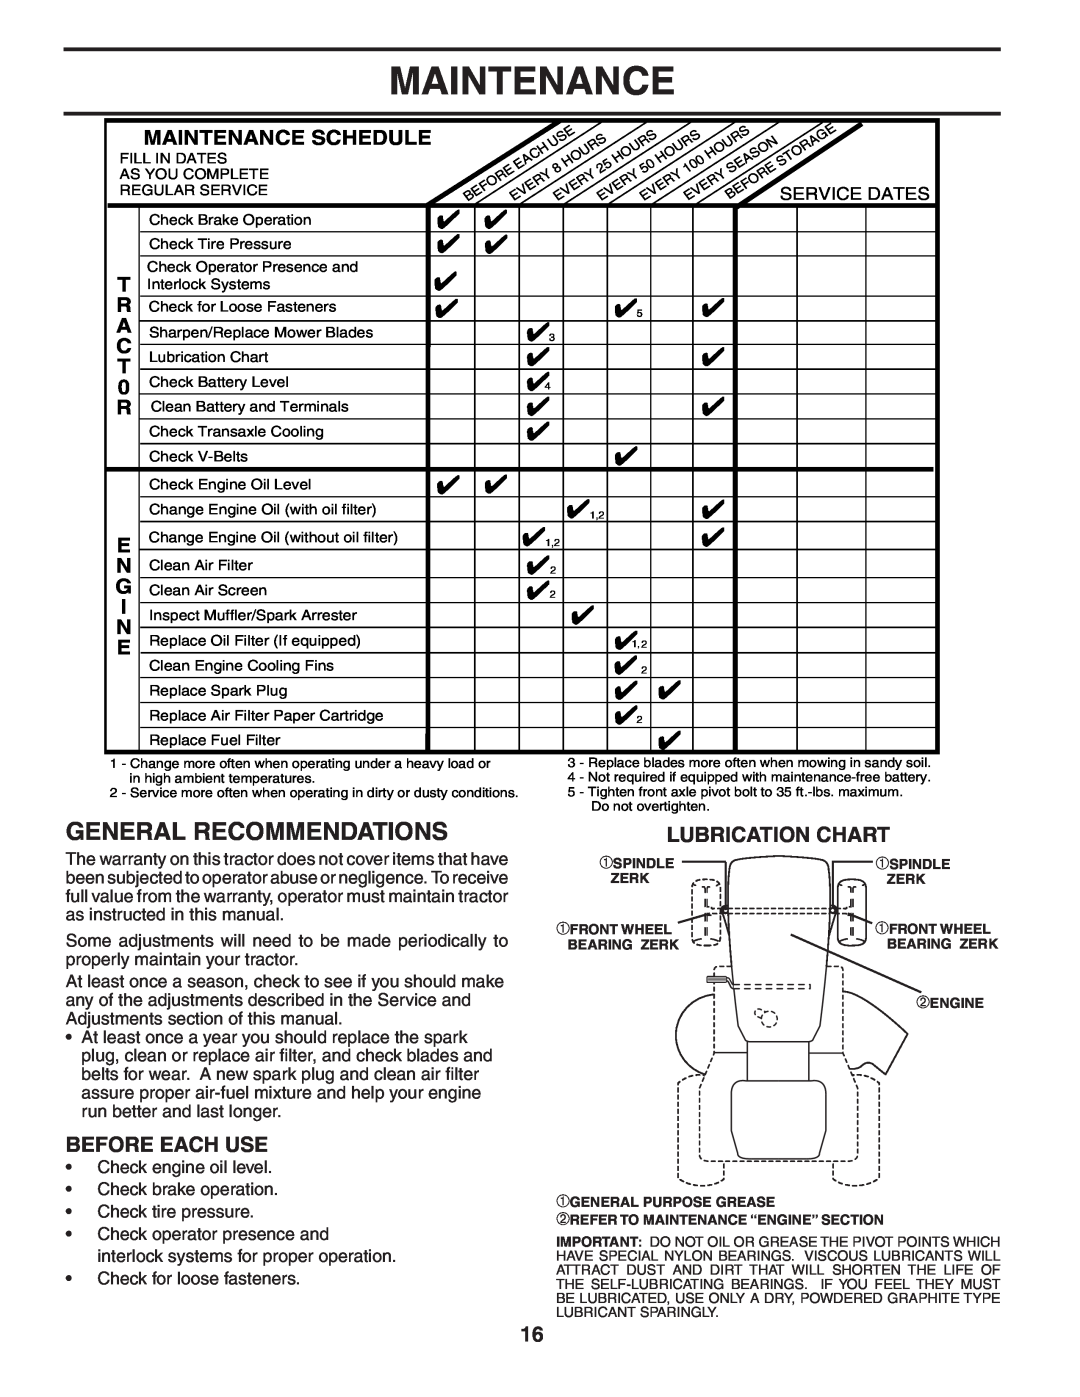 Poulan PD22H42STA owner manual Maintenance, General Recommendations, Lubrication Chart, Before Each Use 